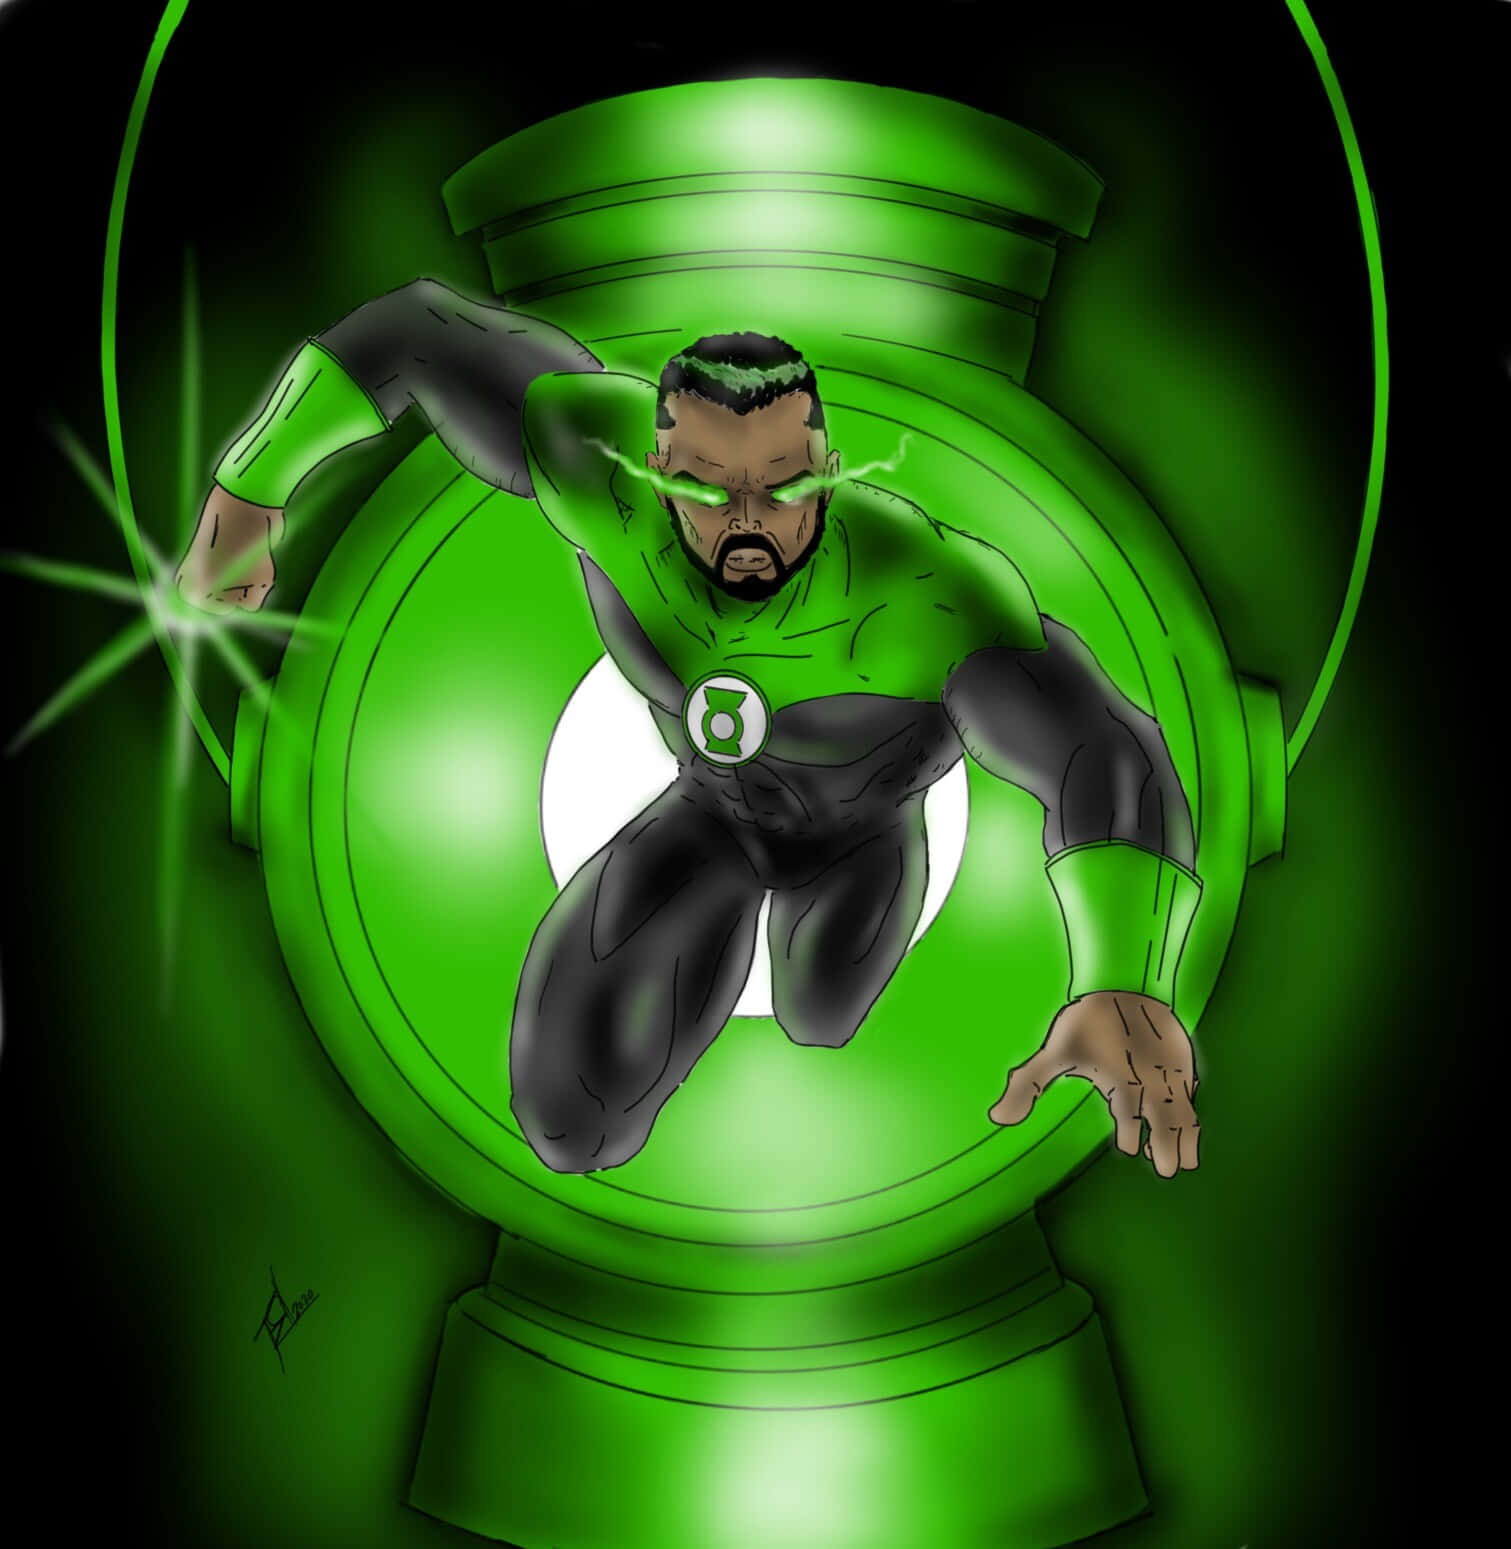 A member of the Green Lantern Corps wielding a powerful power ring.